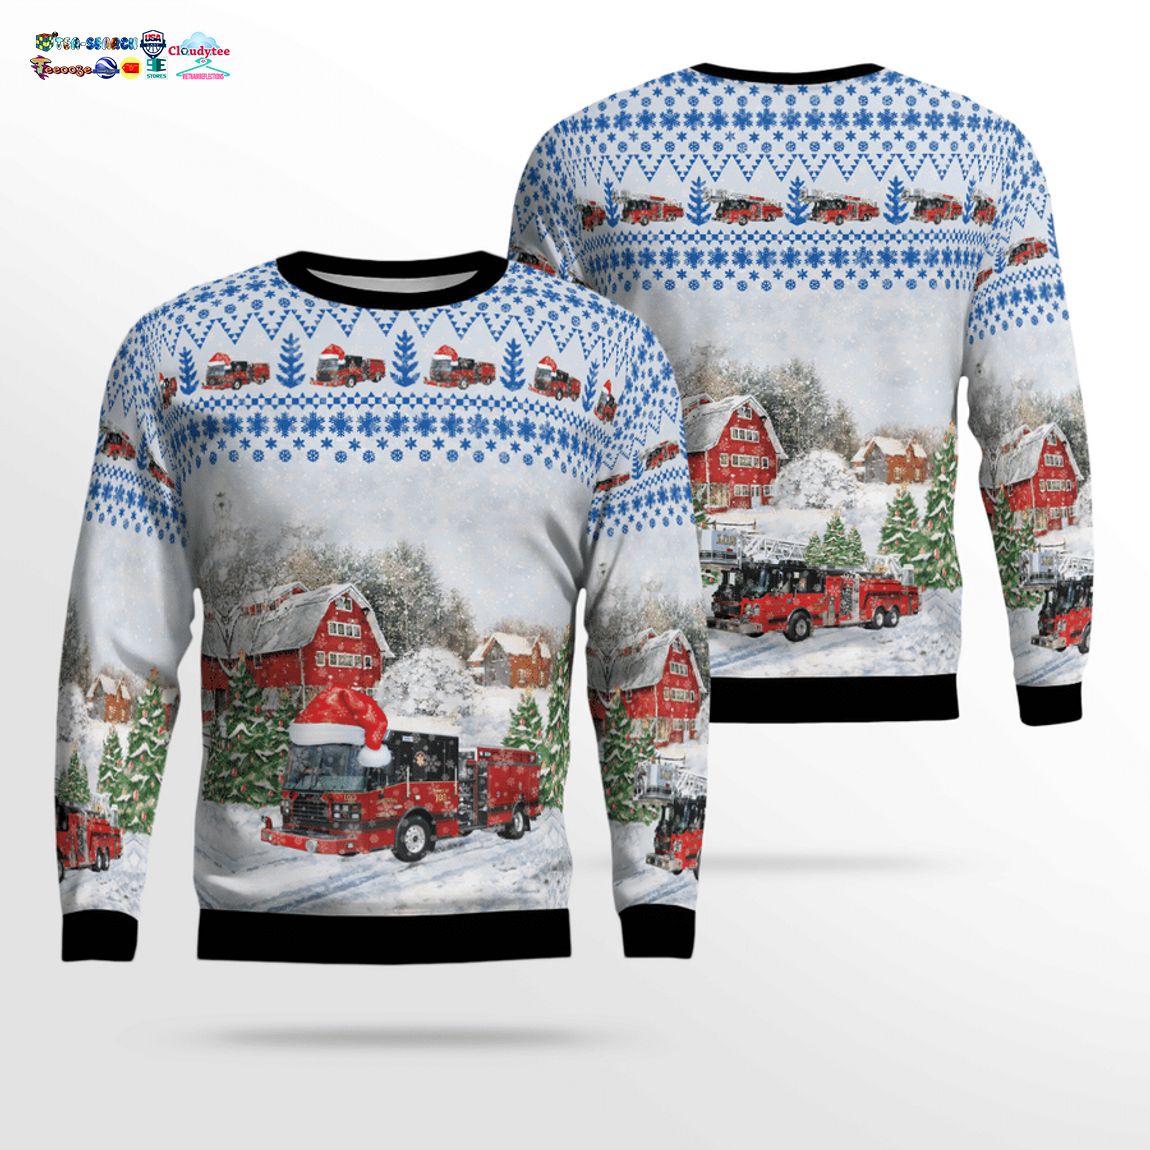 illinois-downers-grove-fire-department-3d-christmas-sweater-1-ALydG.jpg